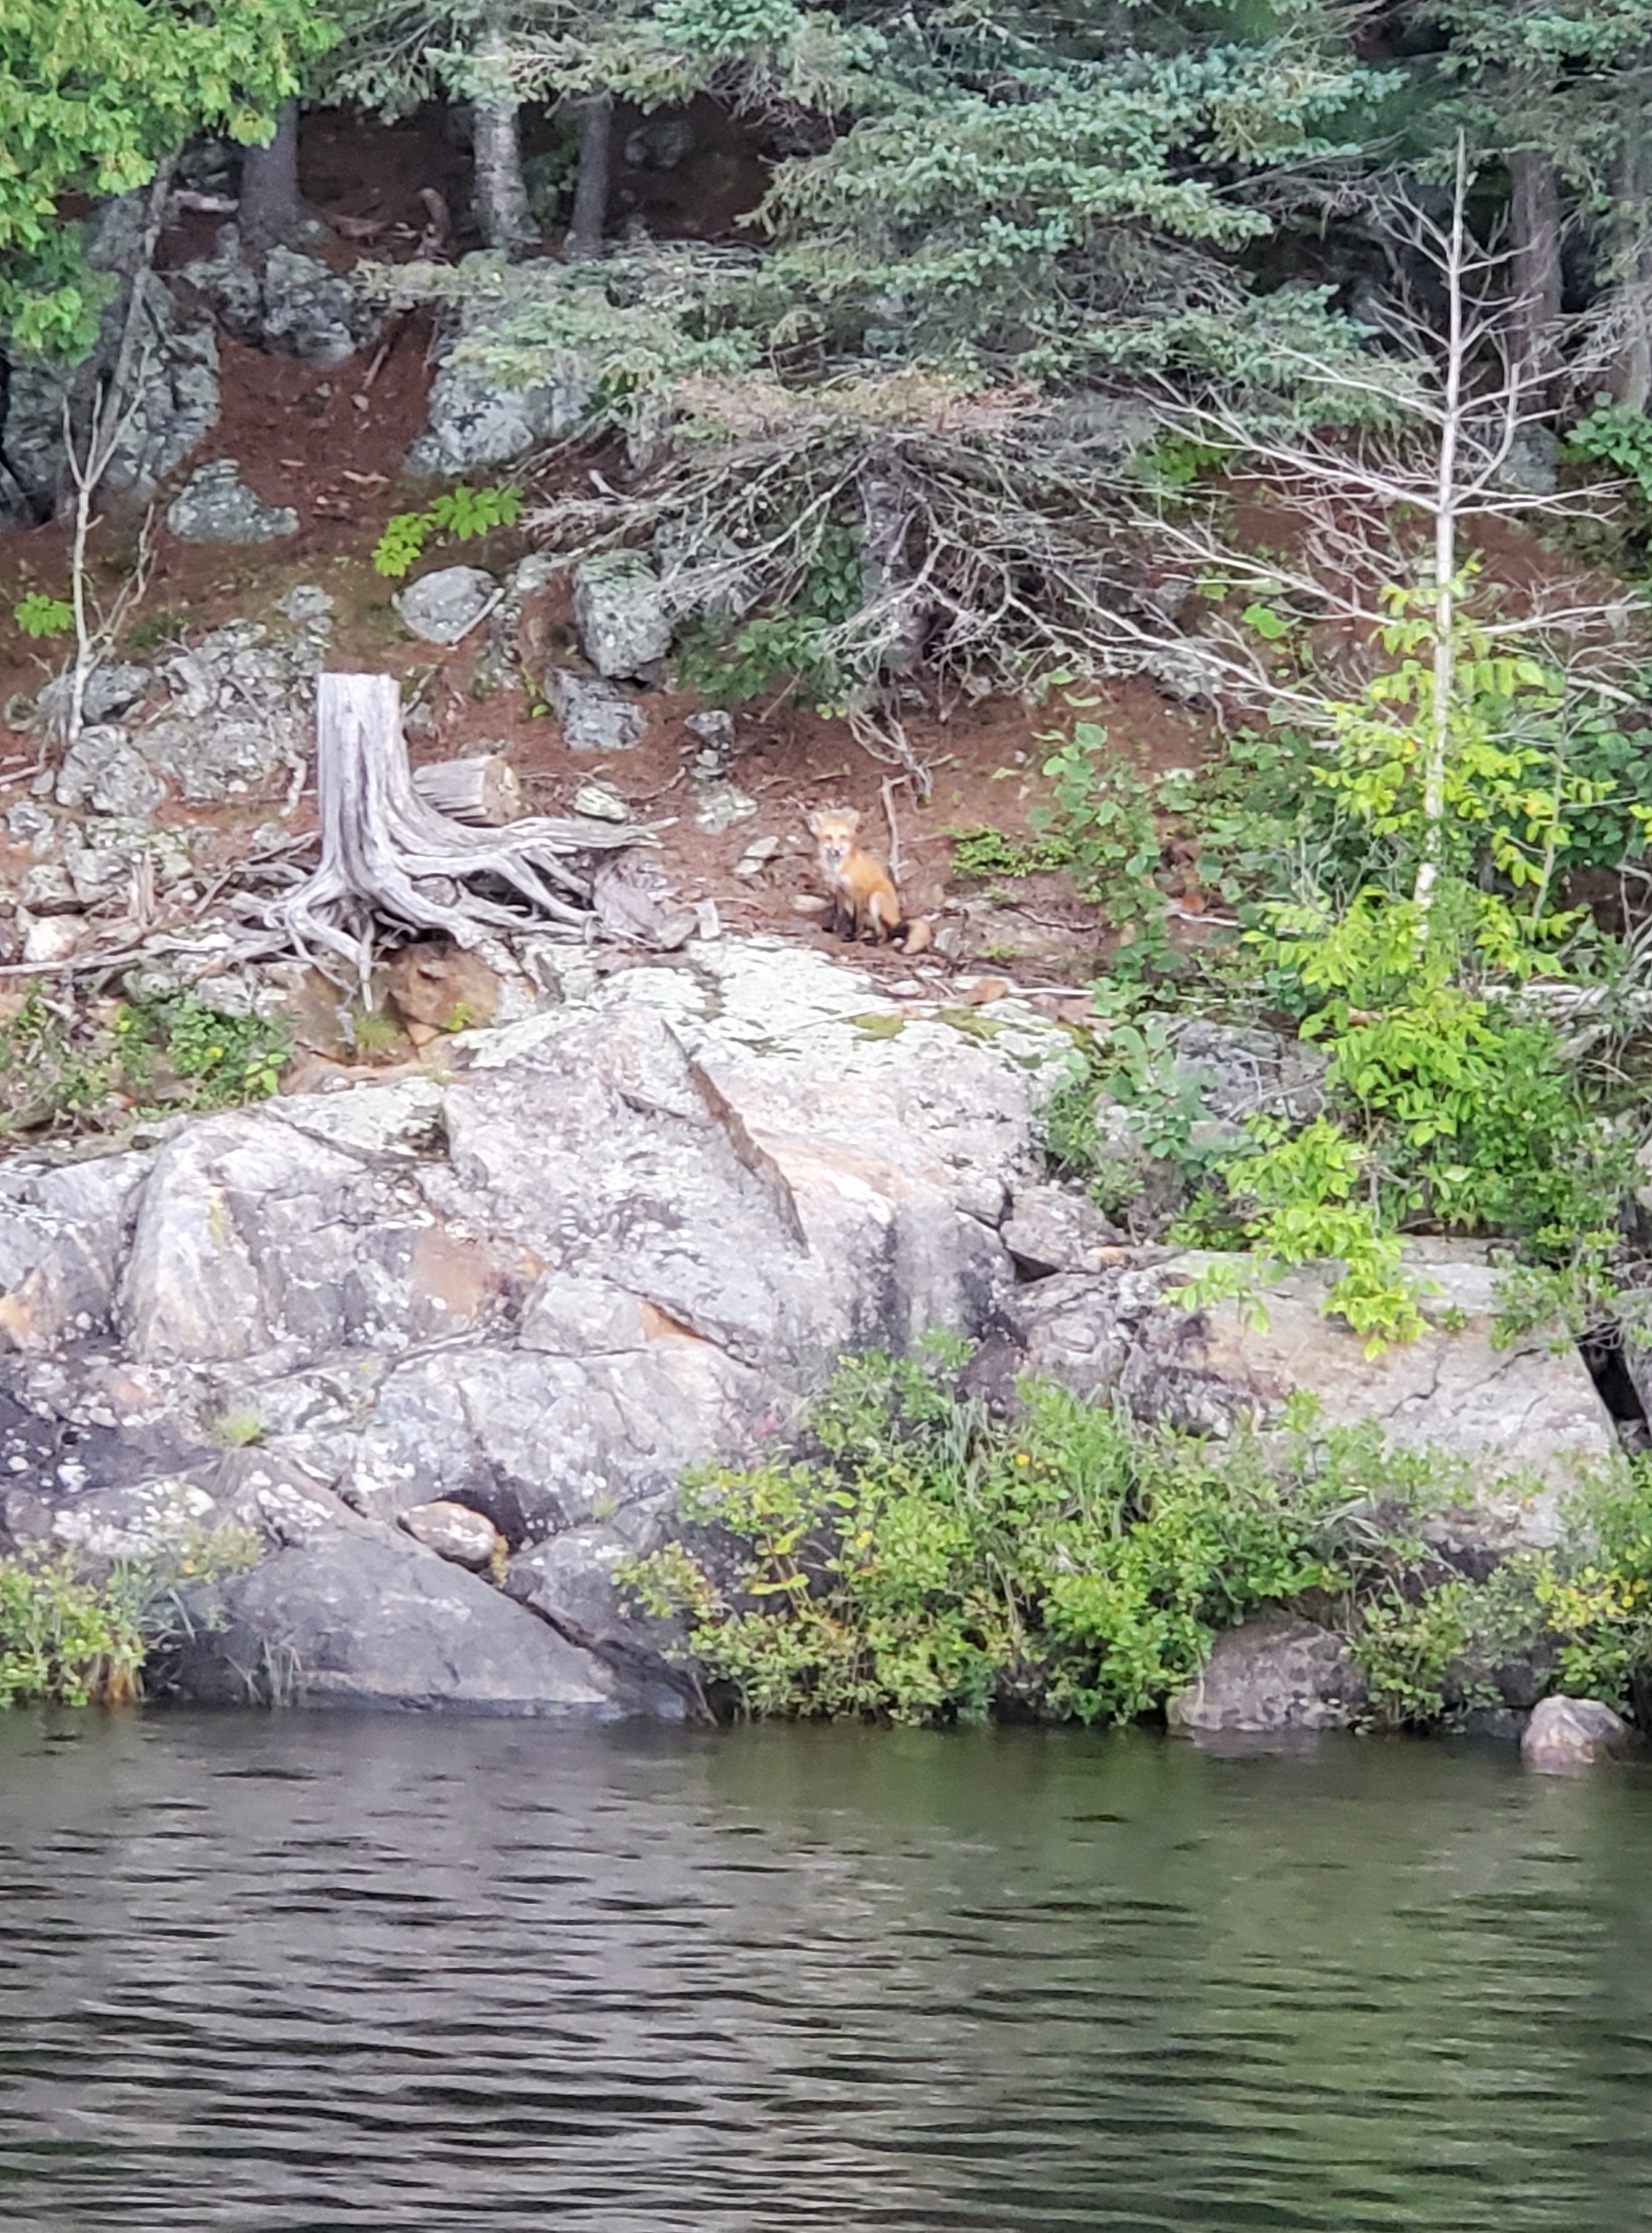 a fox sitting on a rocky, forested bank by a lake.